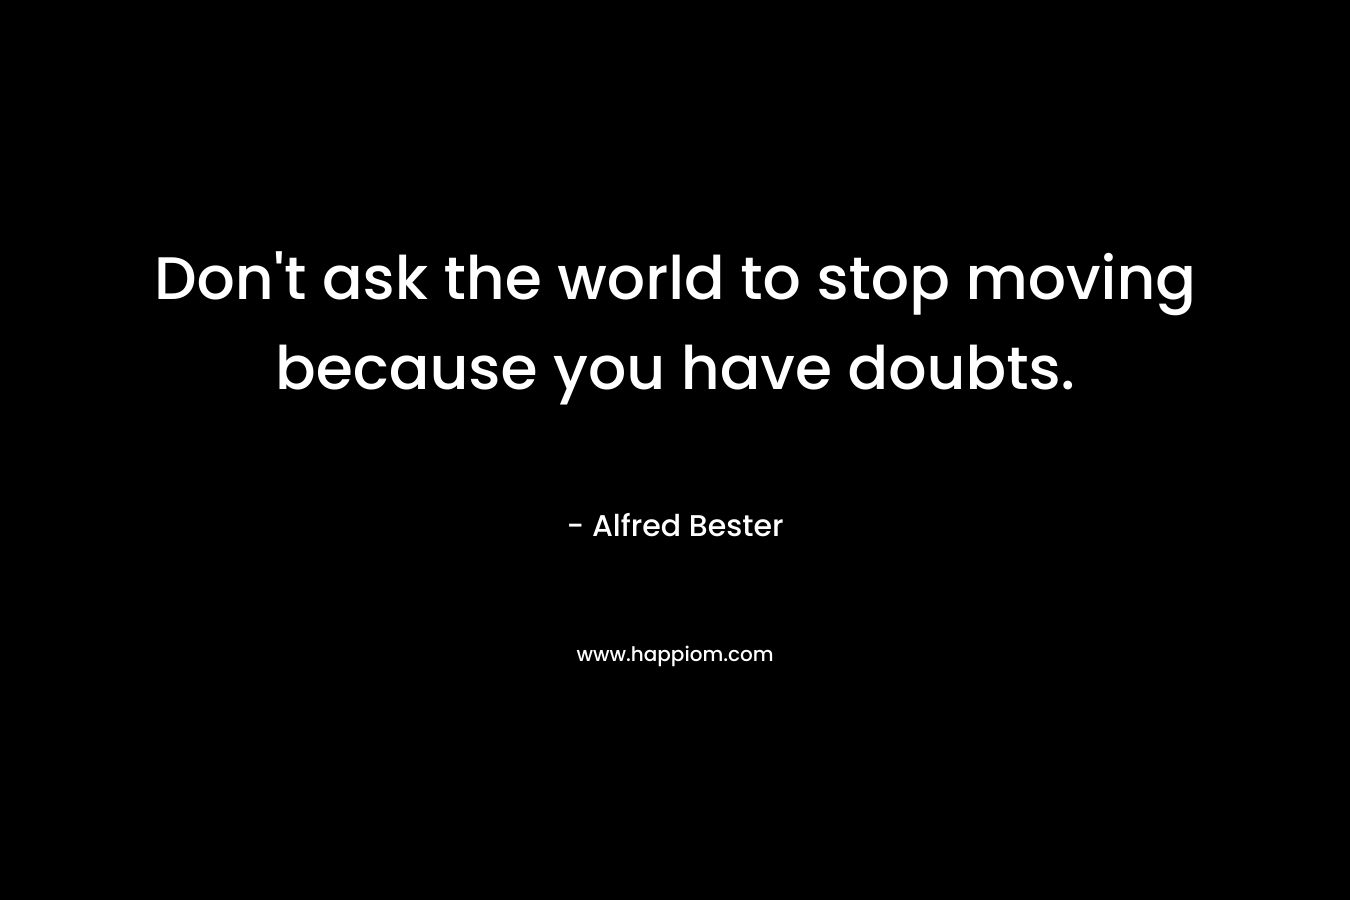 Don’t ask the world to stop moving because you have doubts. – Alfred Bester